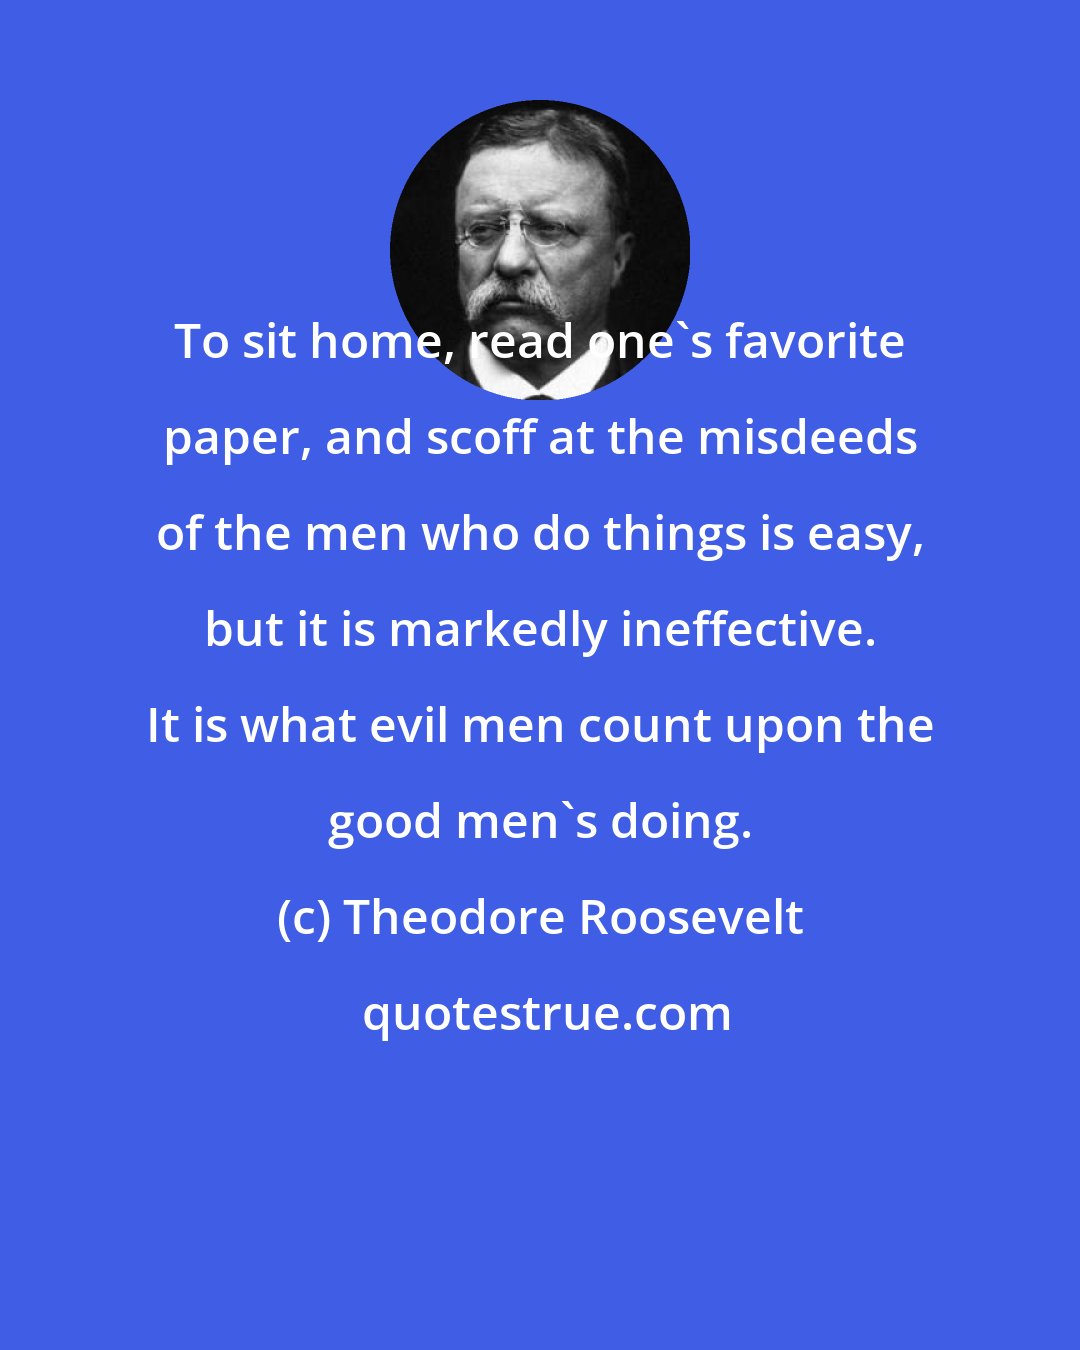 Theodore Roosevelt: To sit home, read one's favorite paper, and scoff at the misdeeds of the men who do things is easy, but it is markedly ineffective. It is what evil men count upon the good men's doing.